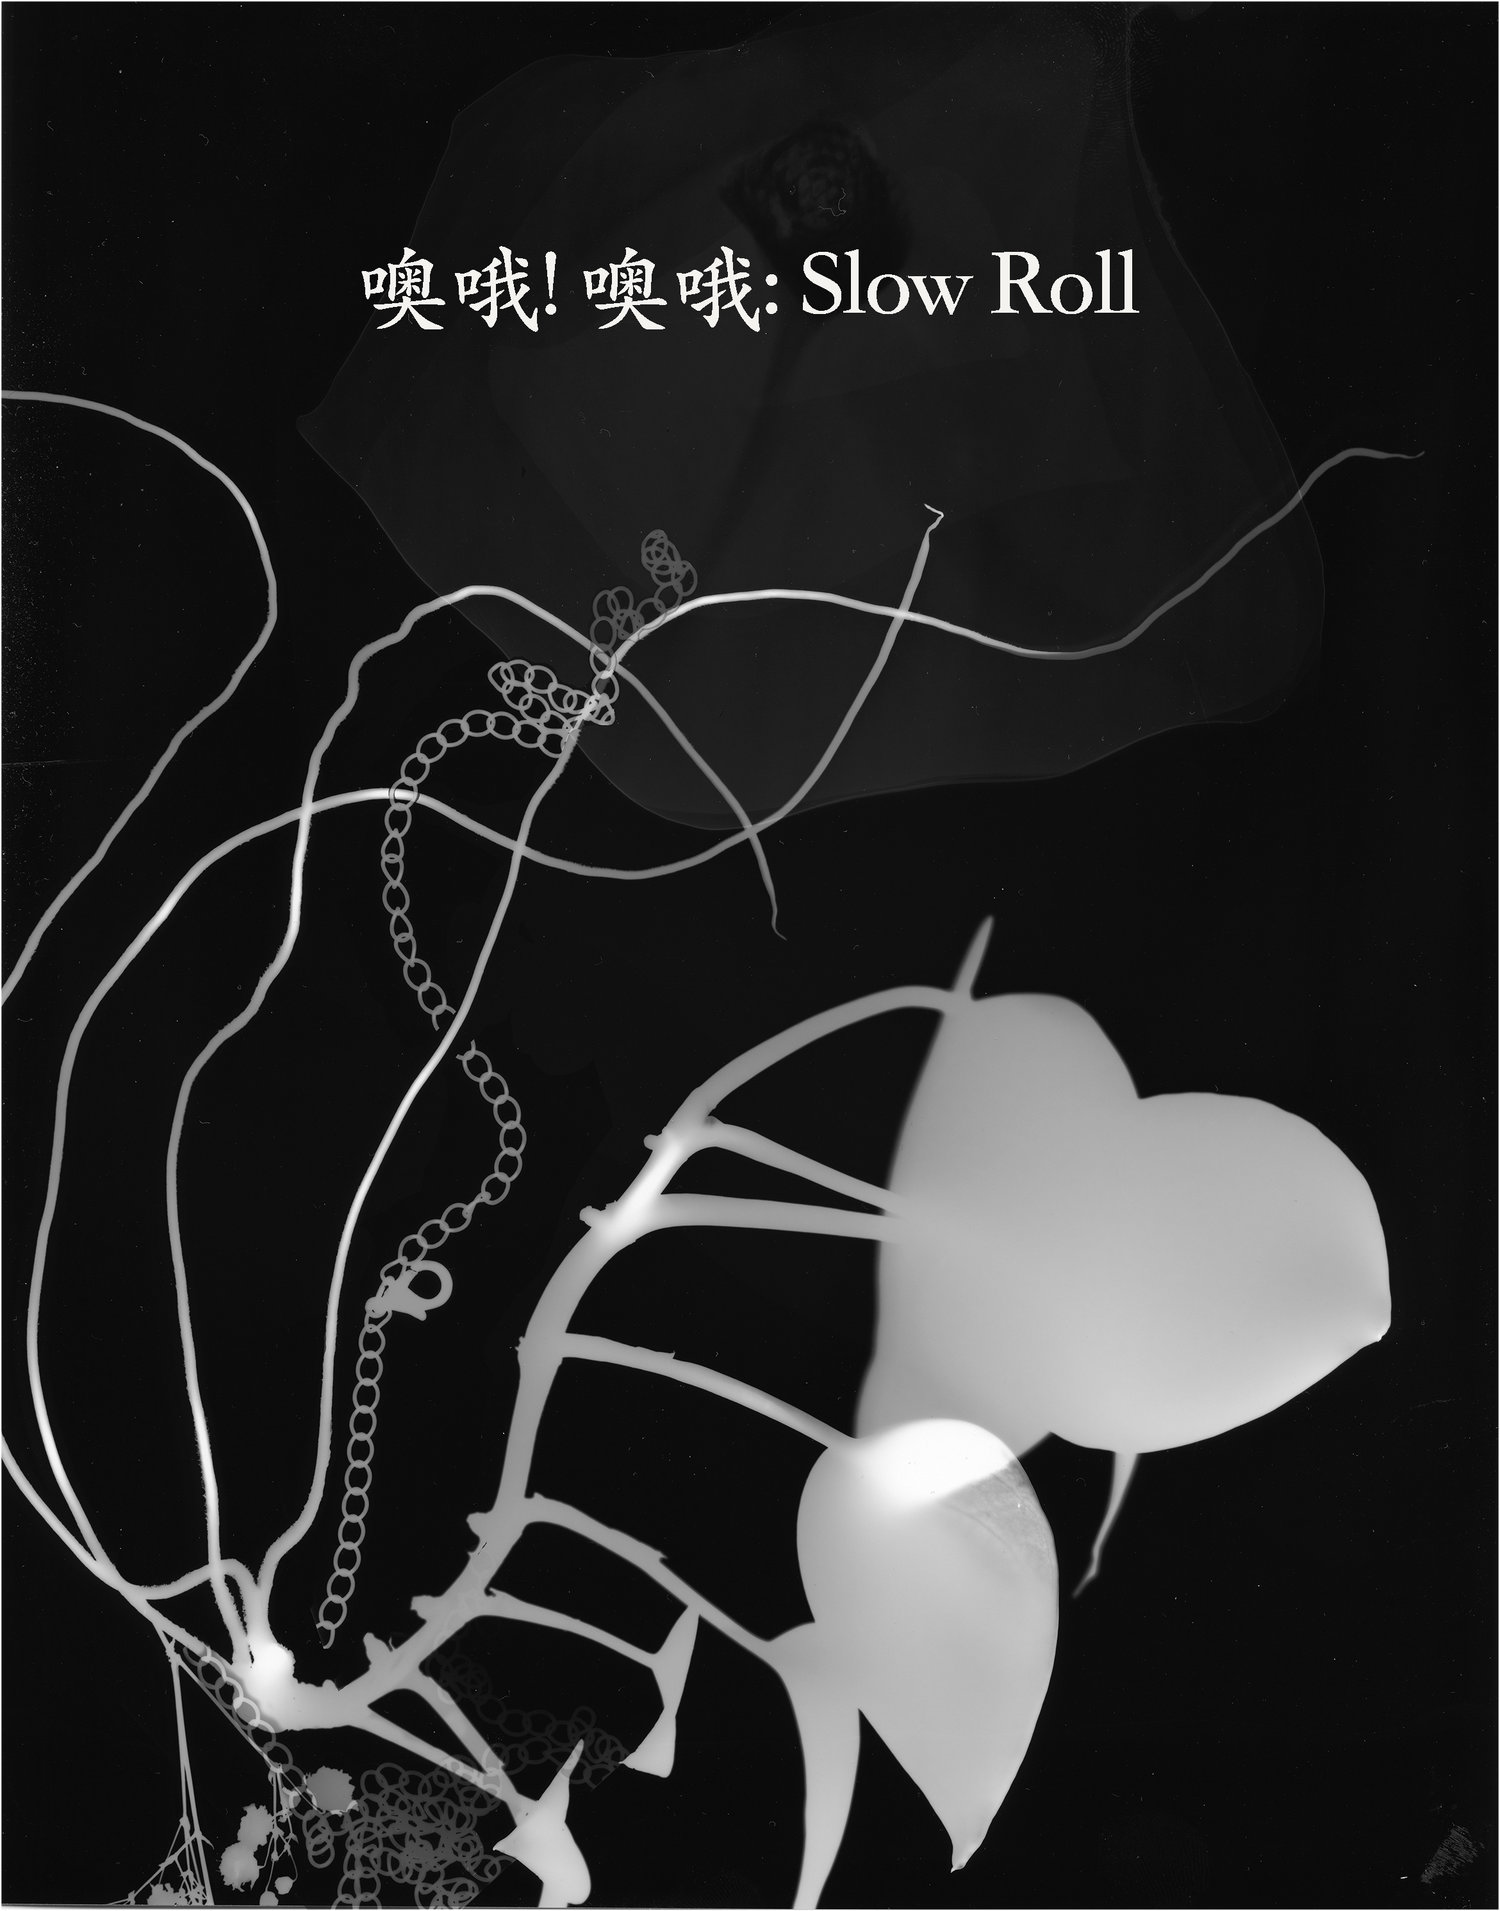 Slow Roll by Salvage Vanguard Theater